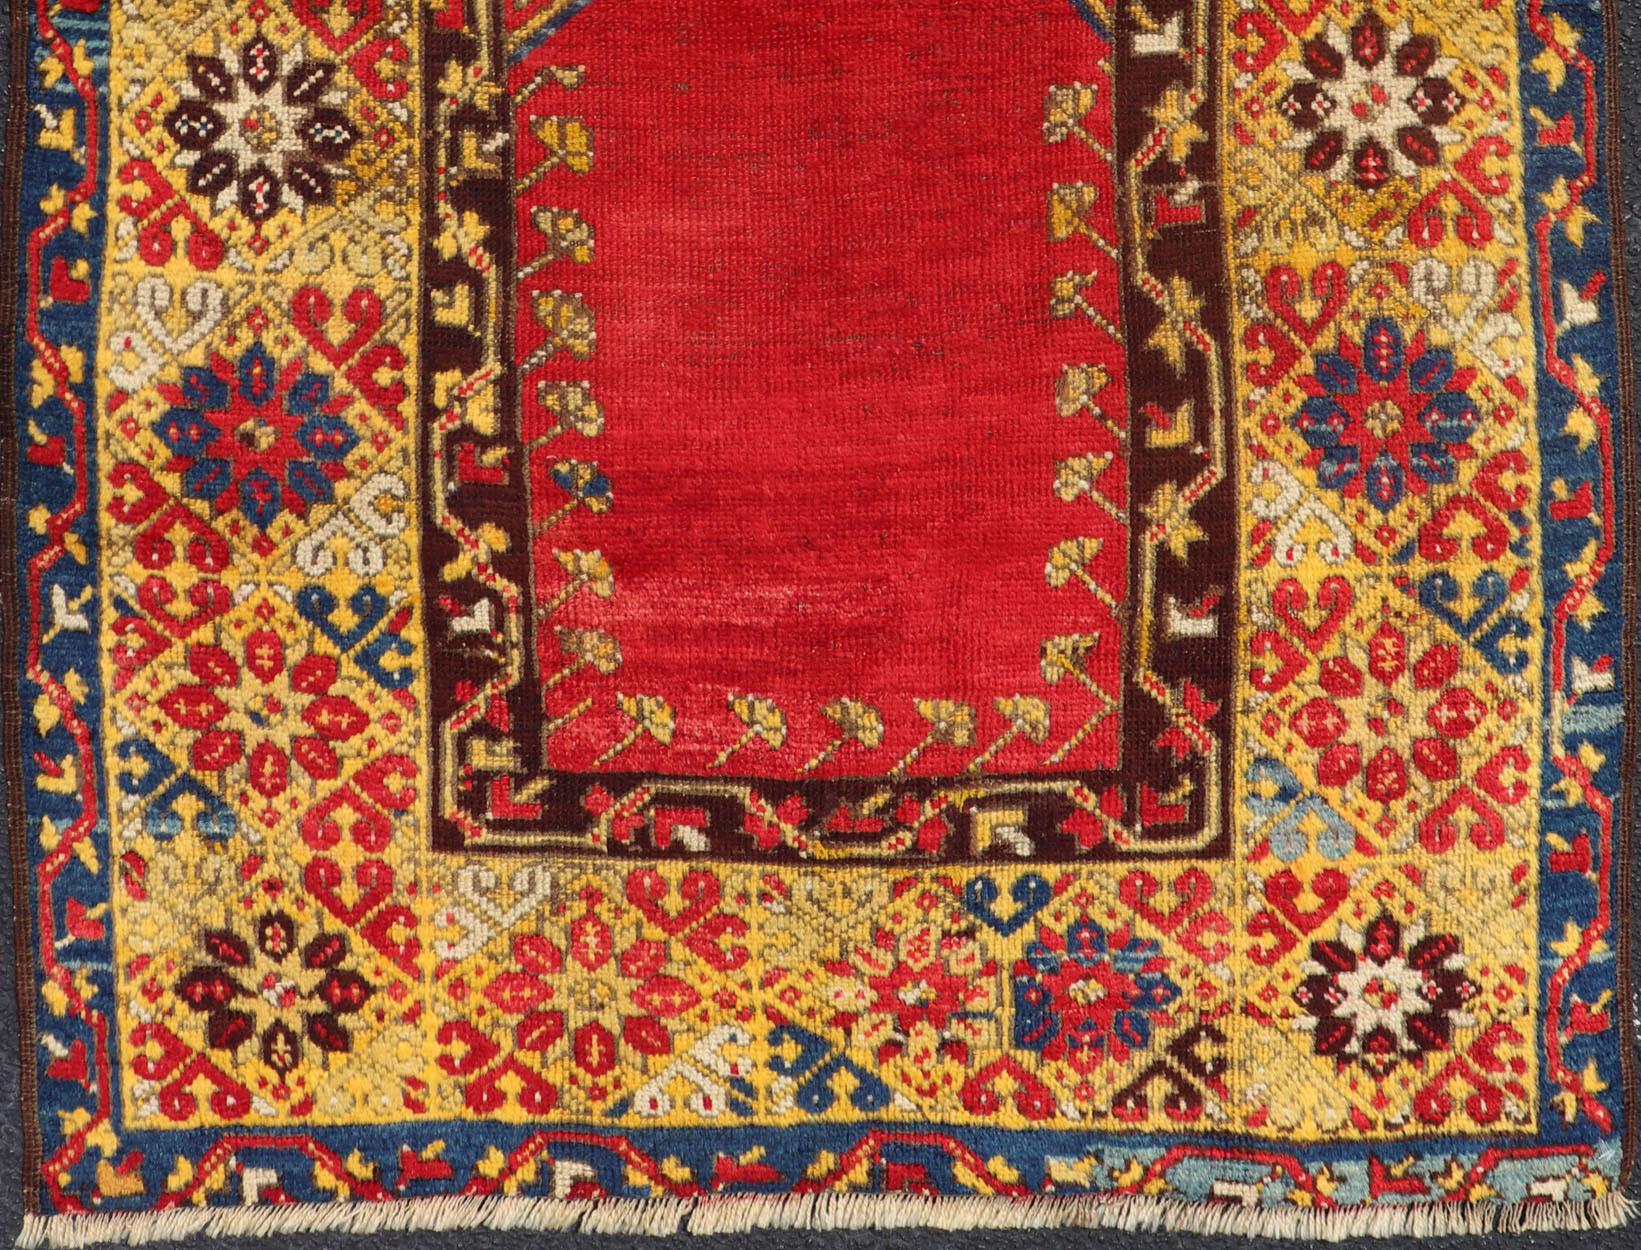 Hand-Knotted Antique Turkish Prayer Rug in Vibrant Saffron Yellow, Gold, Red and Blue For Sale